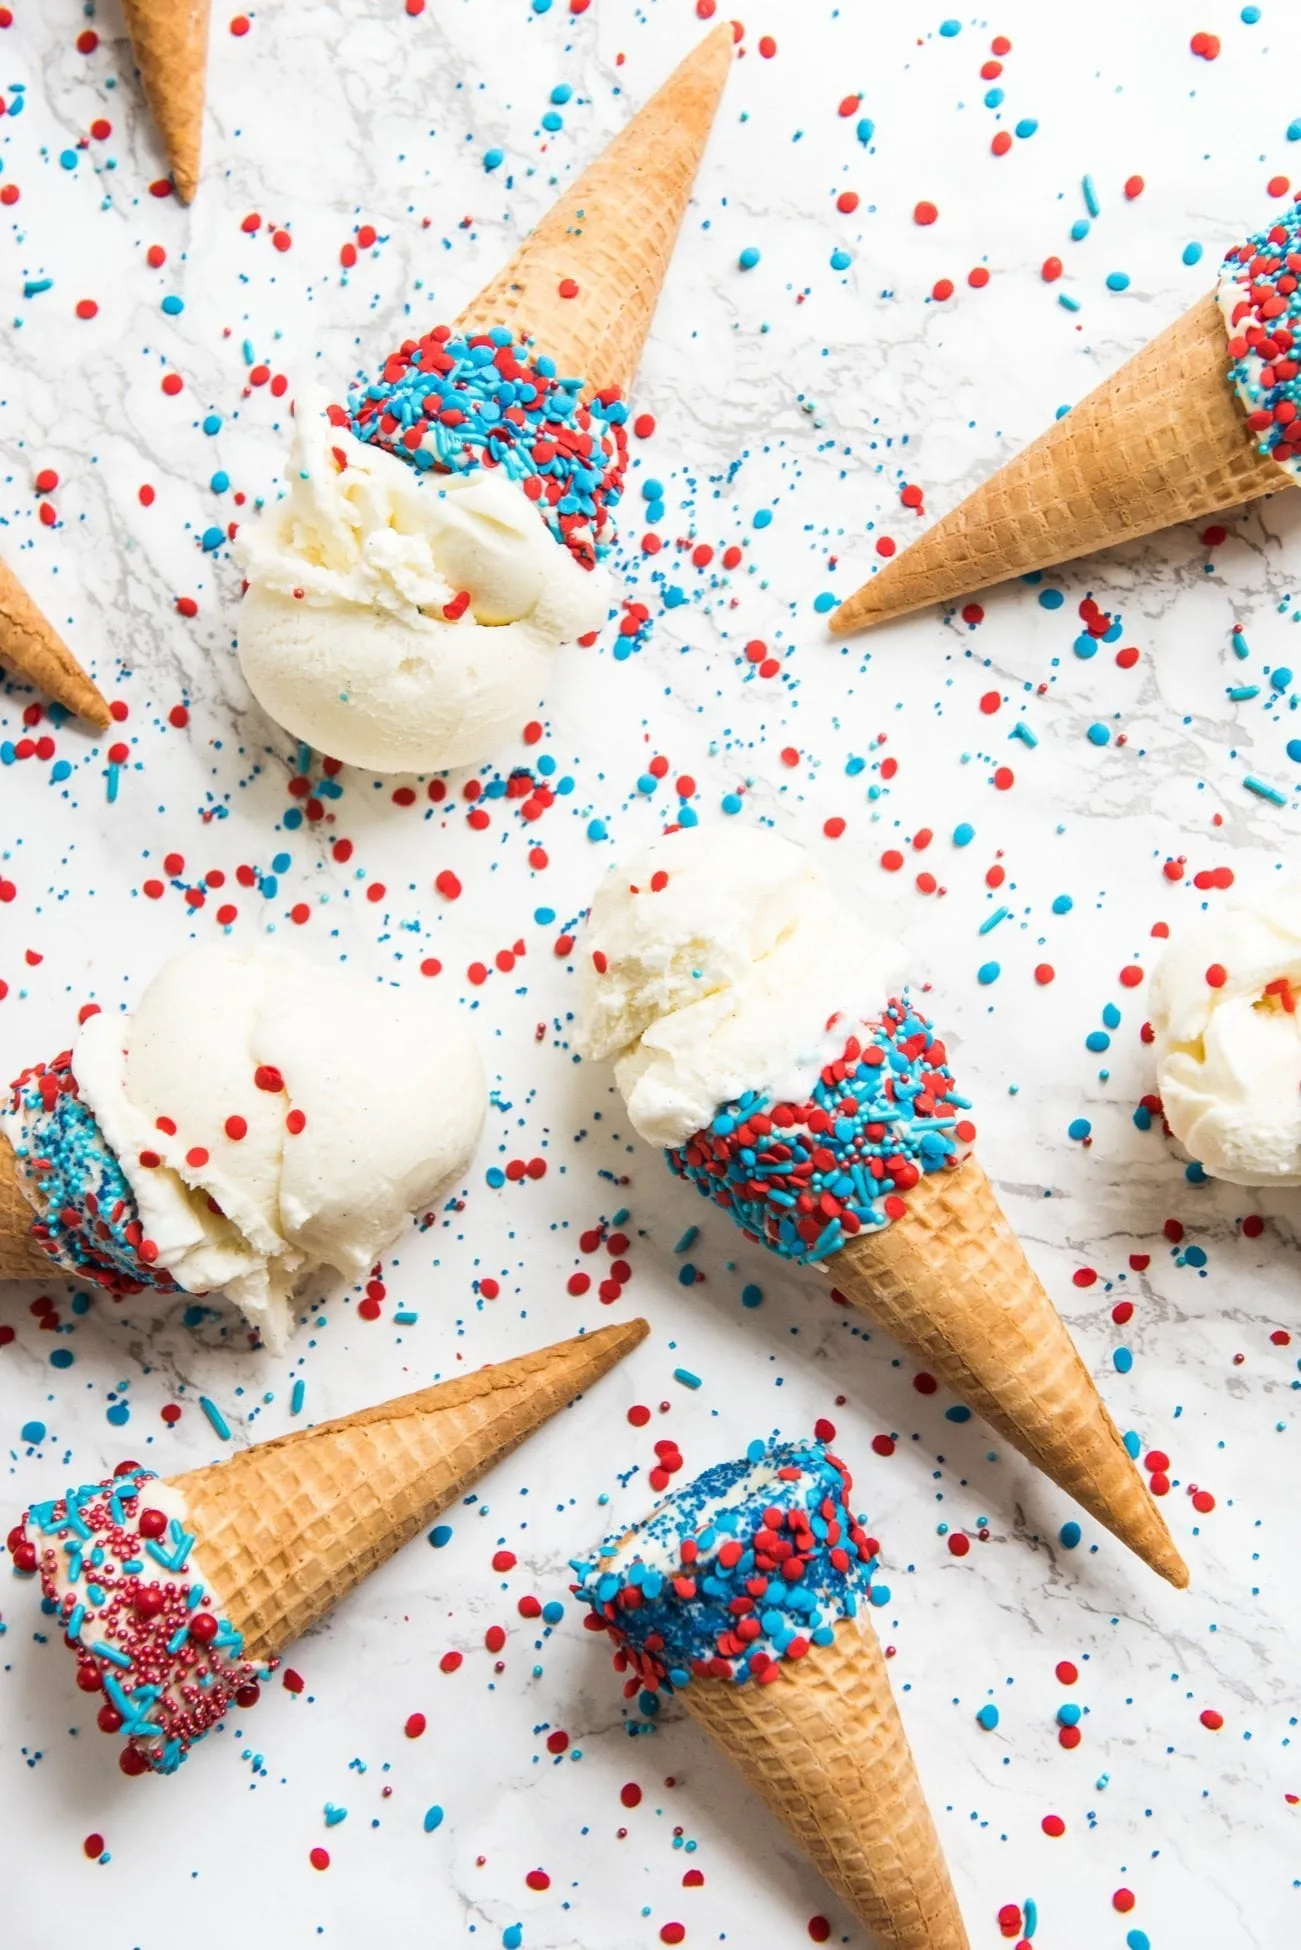 Red, White and Blue 4th of July Ice Cream Cones | 4th of July party ideas, 4th of July desserts and more from @cydconverse